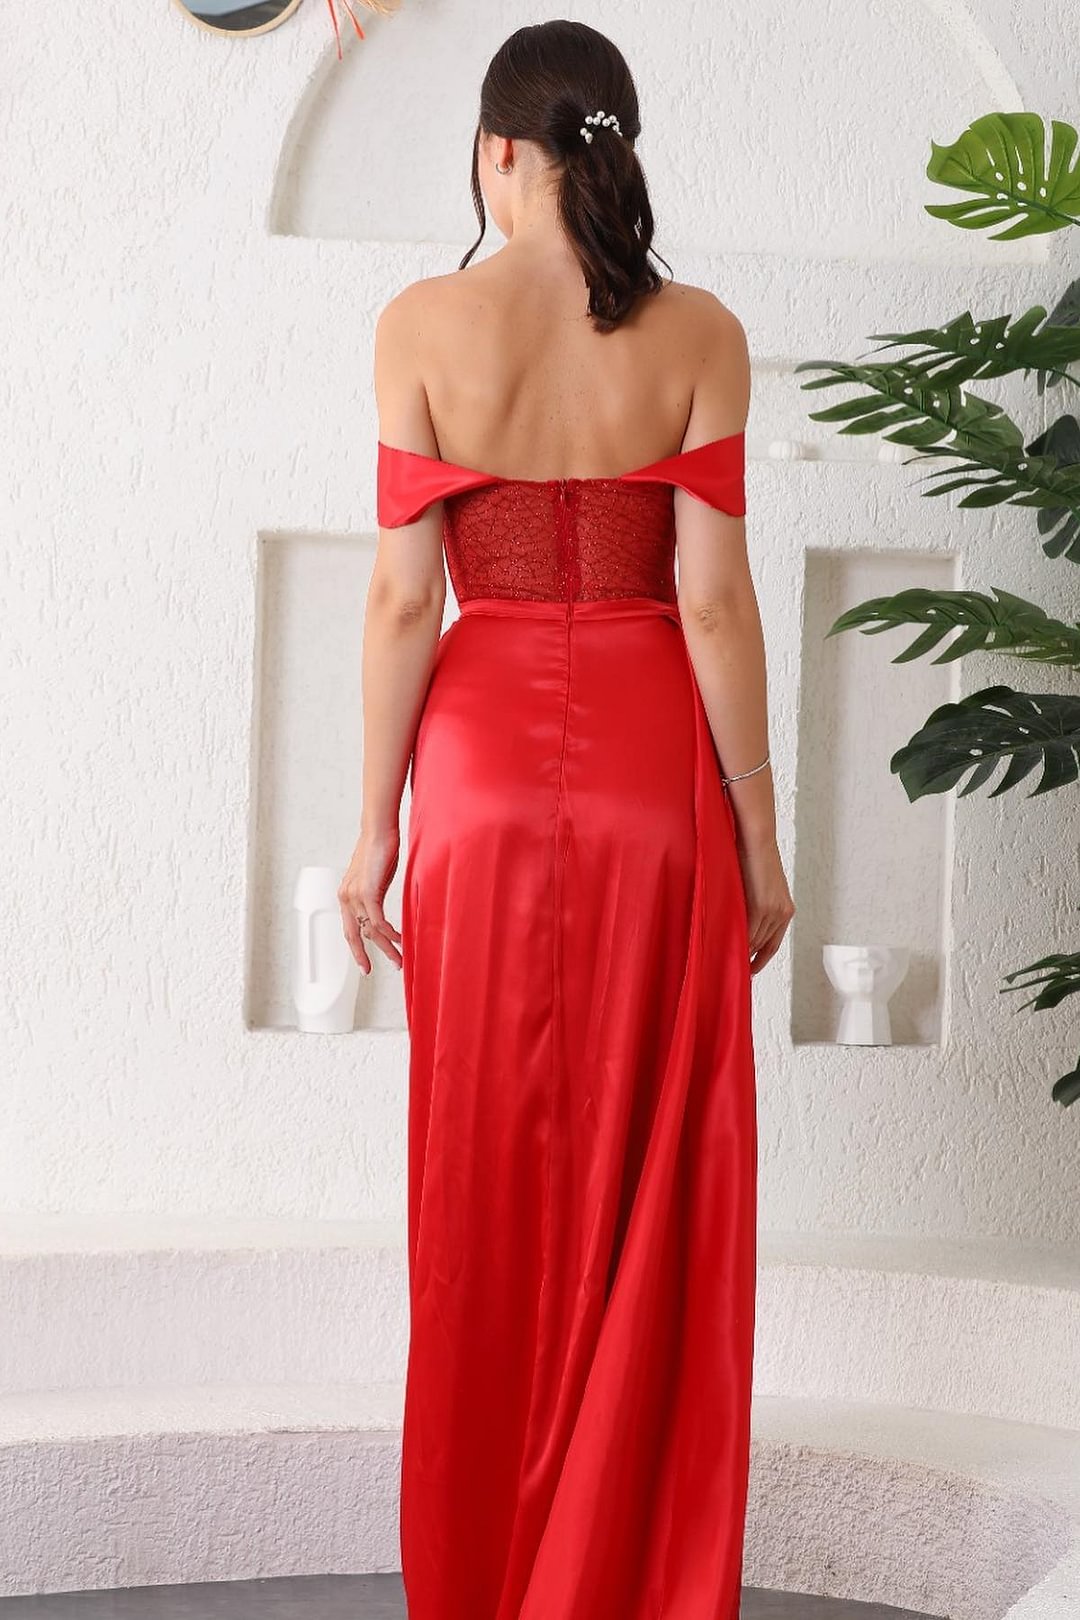 Daisda Red Sweetheart Off The Shoulder Mermaid Prom Dress With Slit